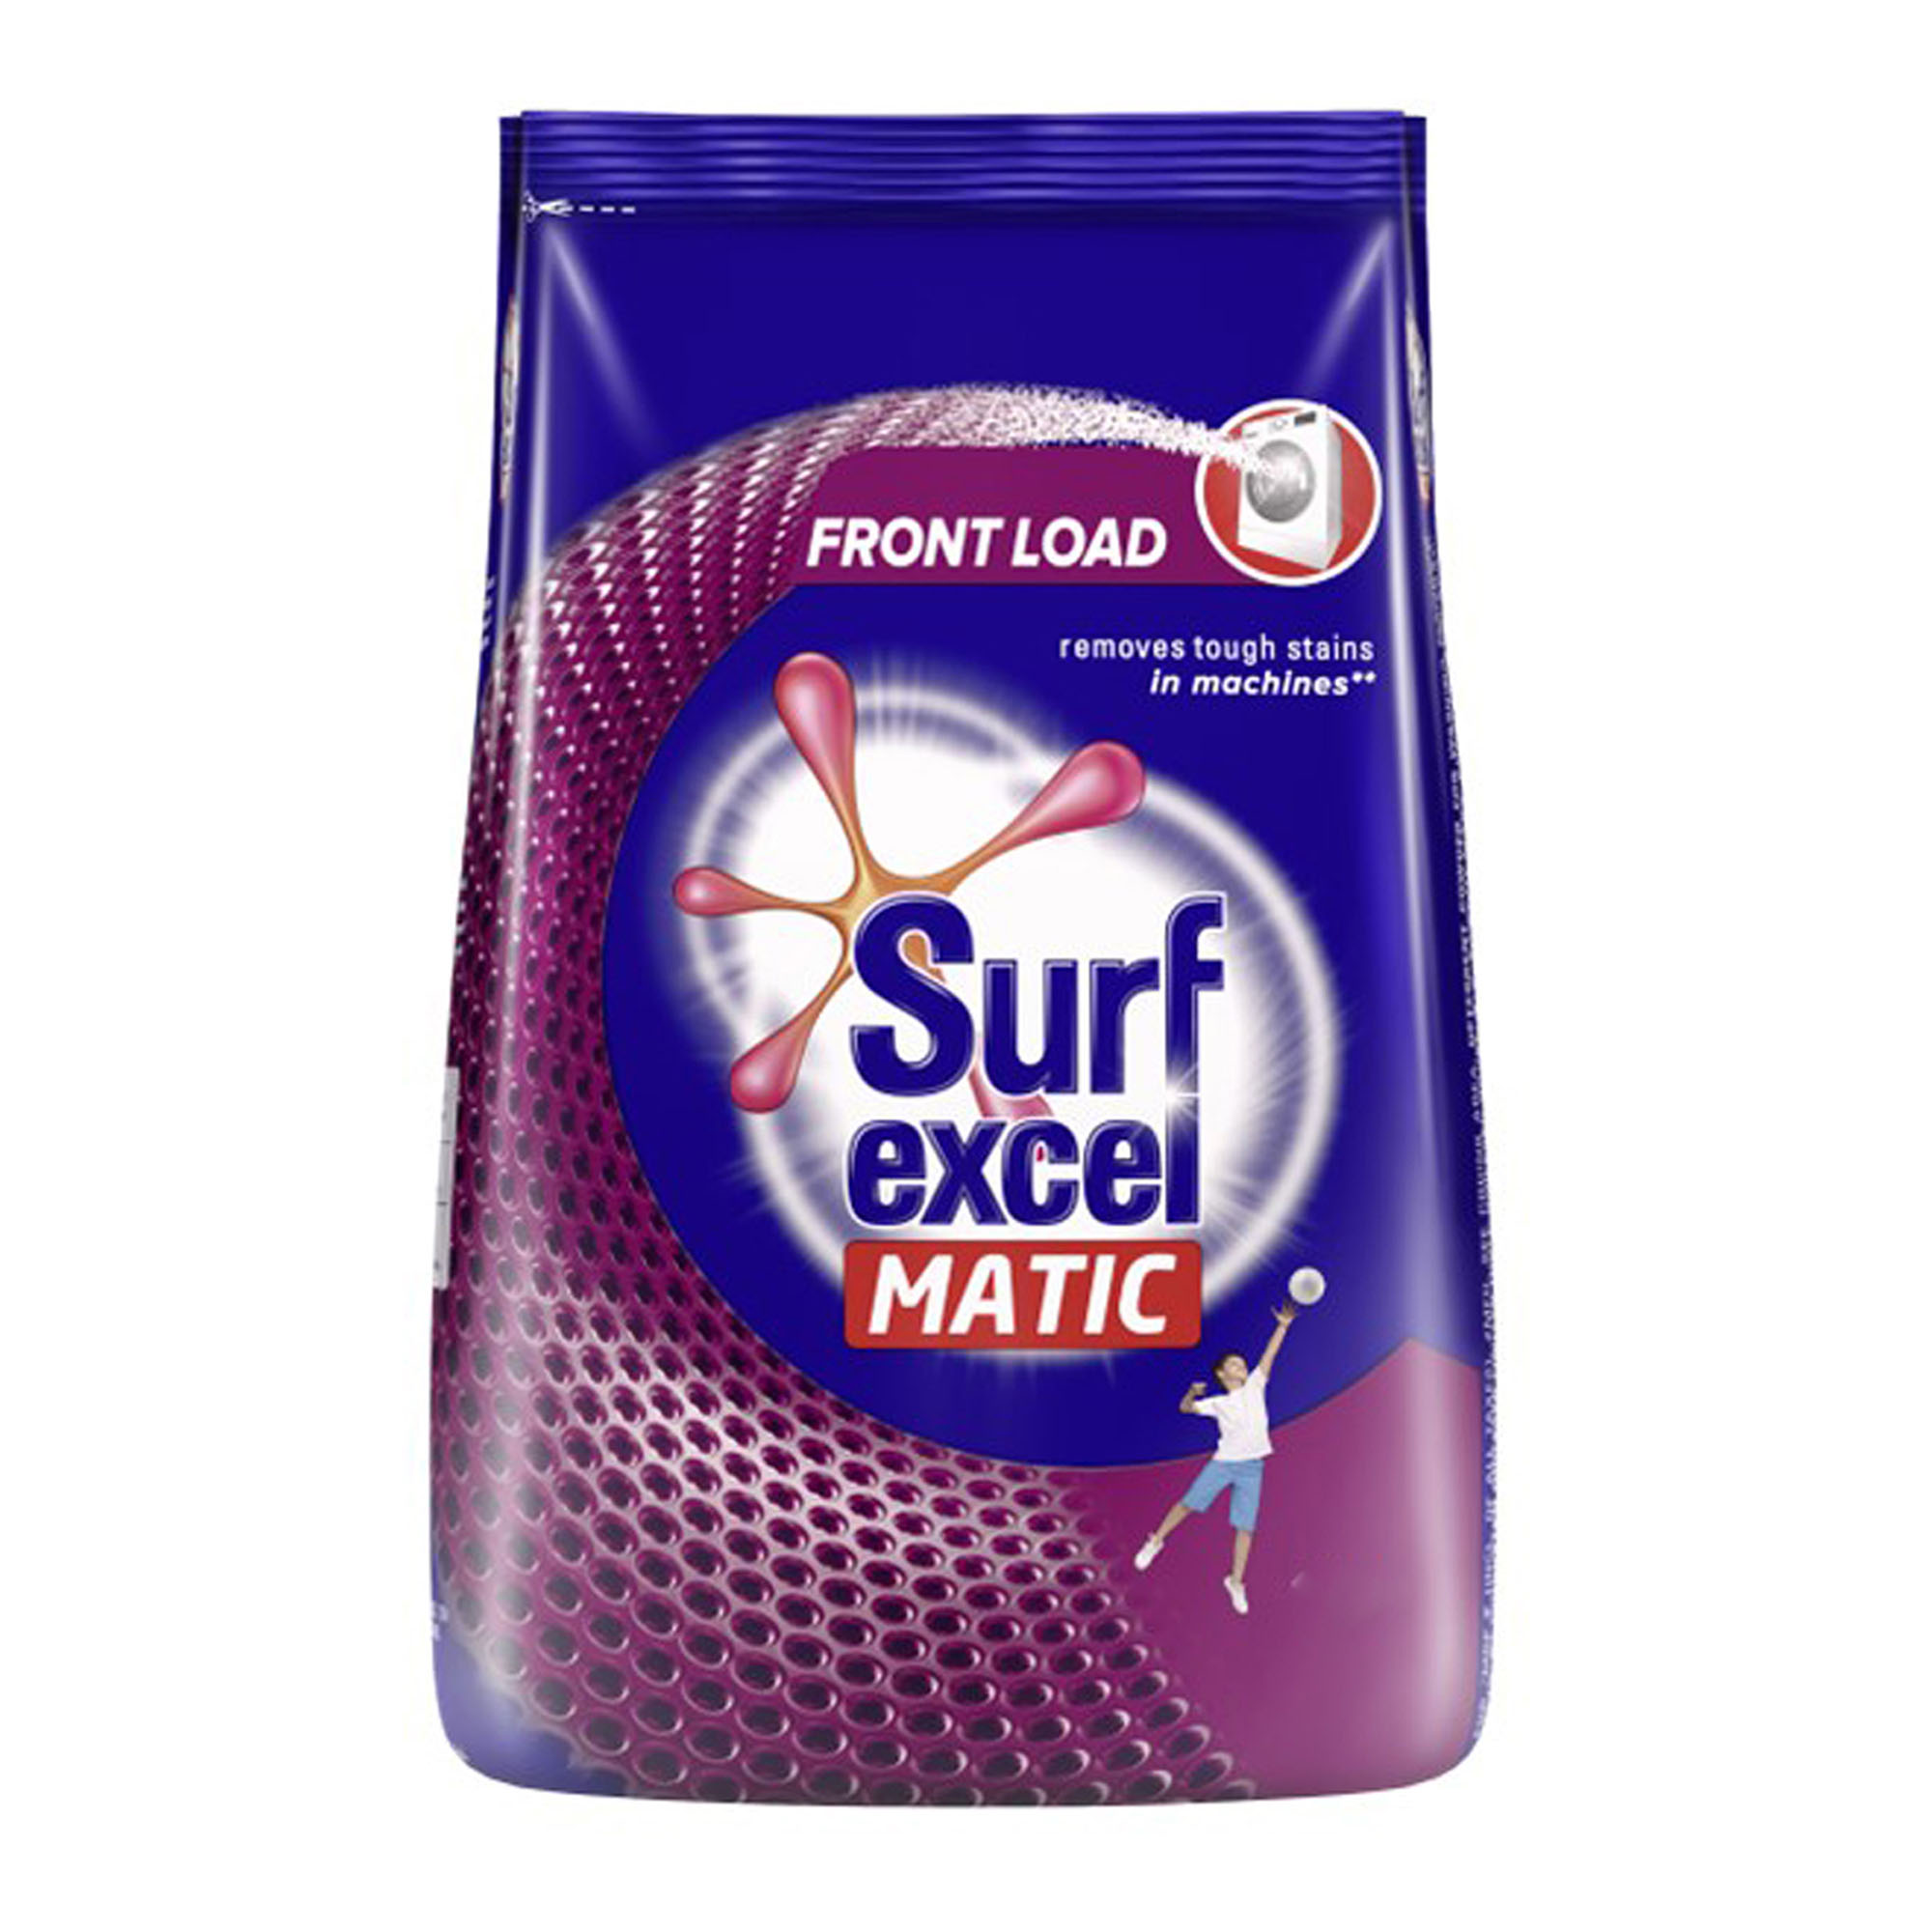 Surf Excel Matic Front...